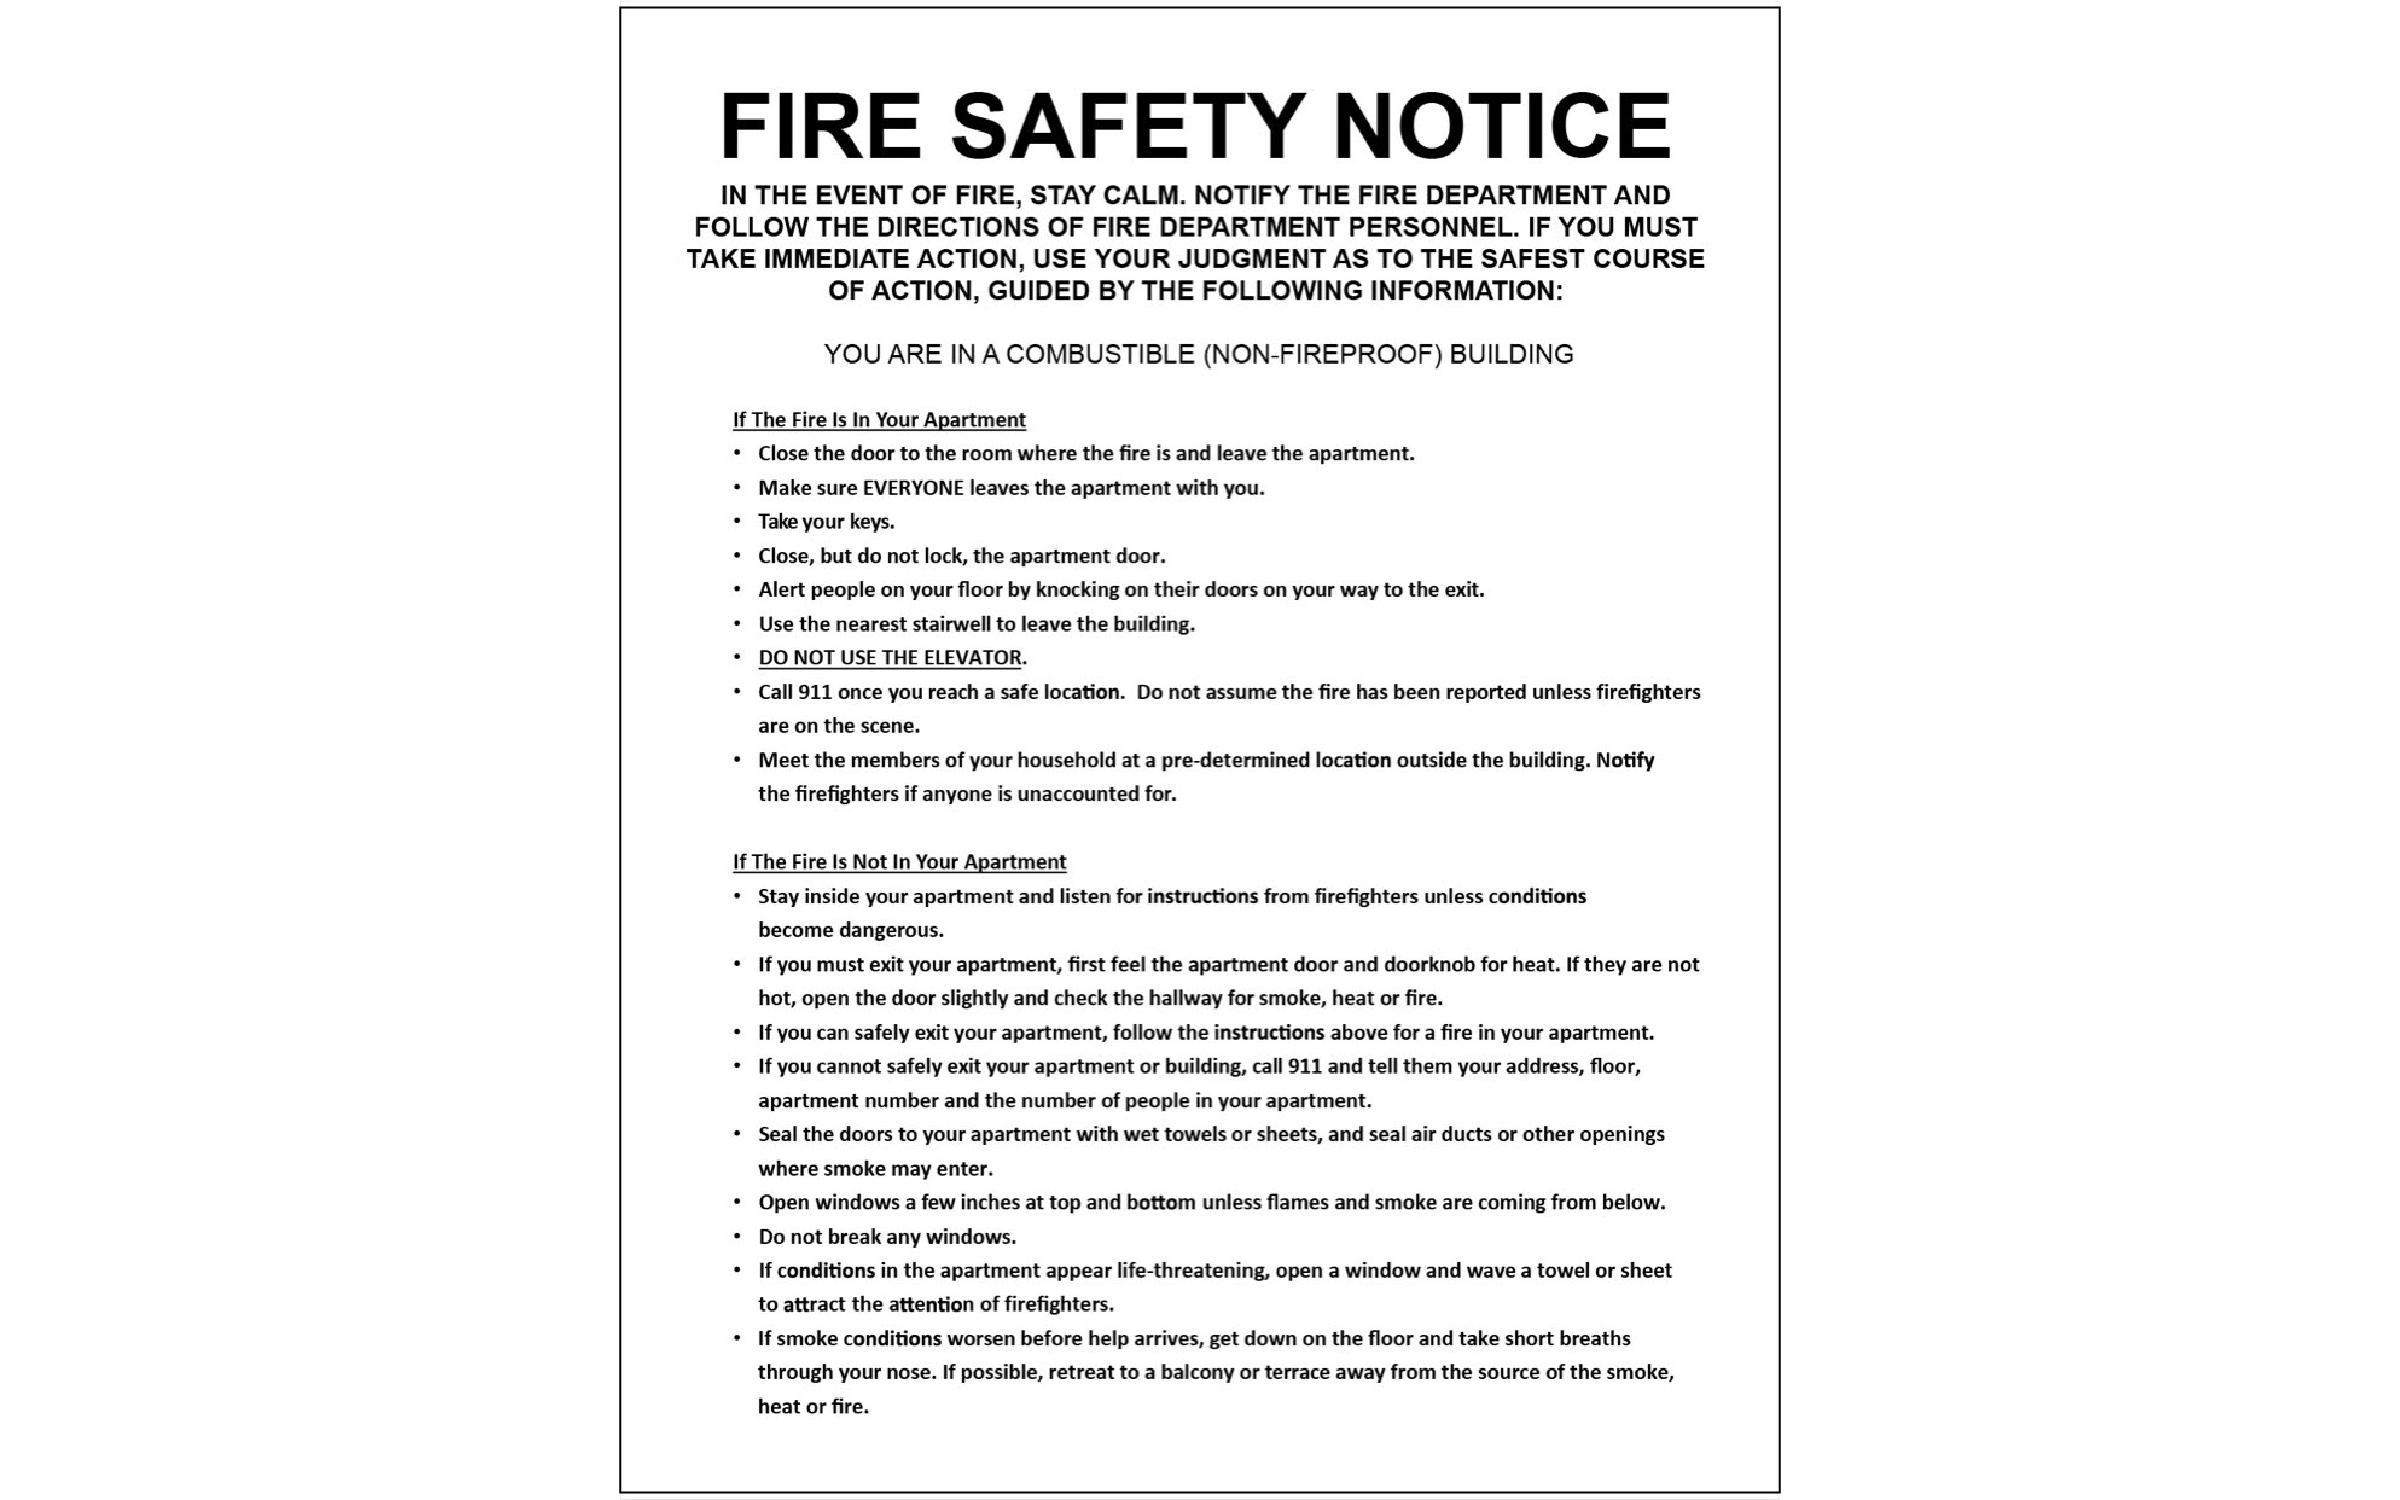 Sign 5) COMBUSTIBLE Fire Safety Notice